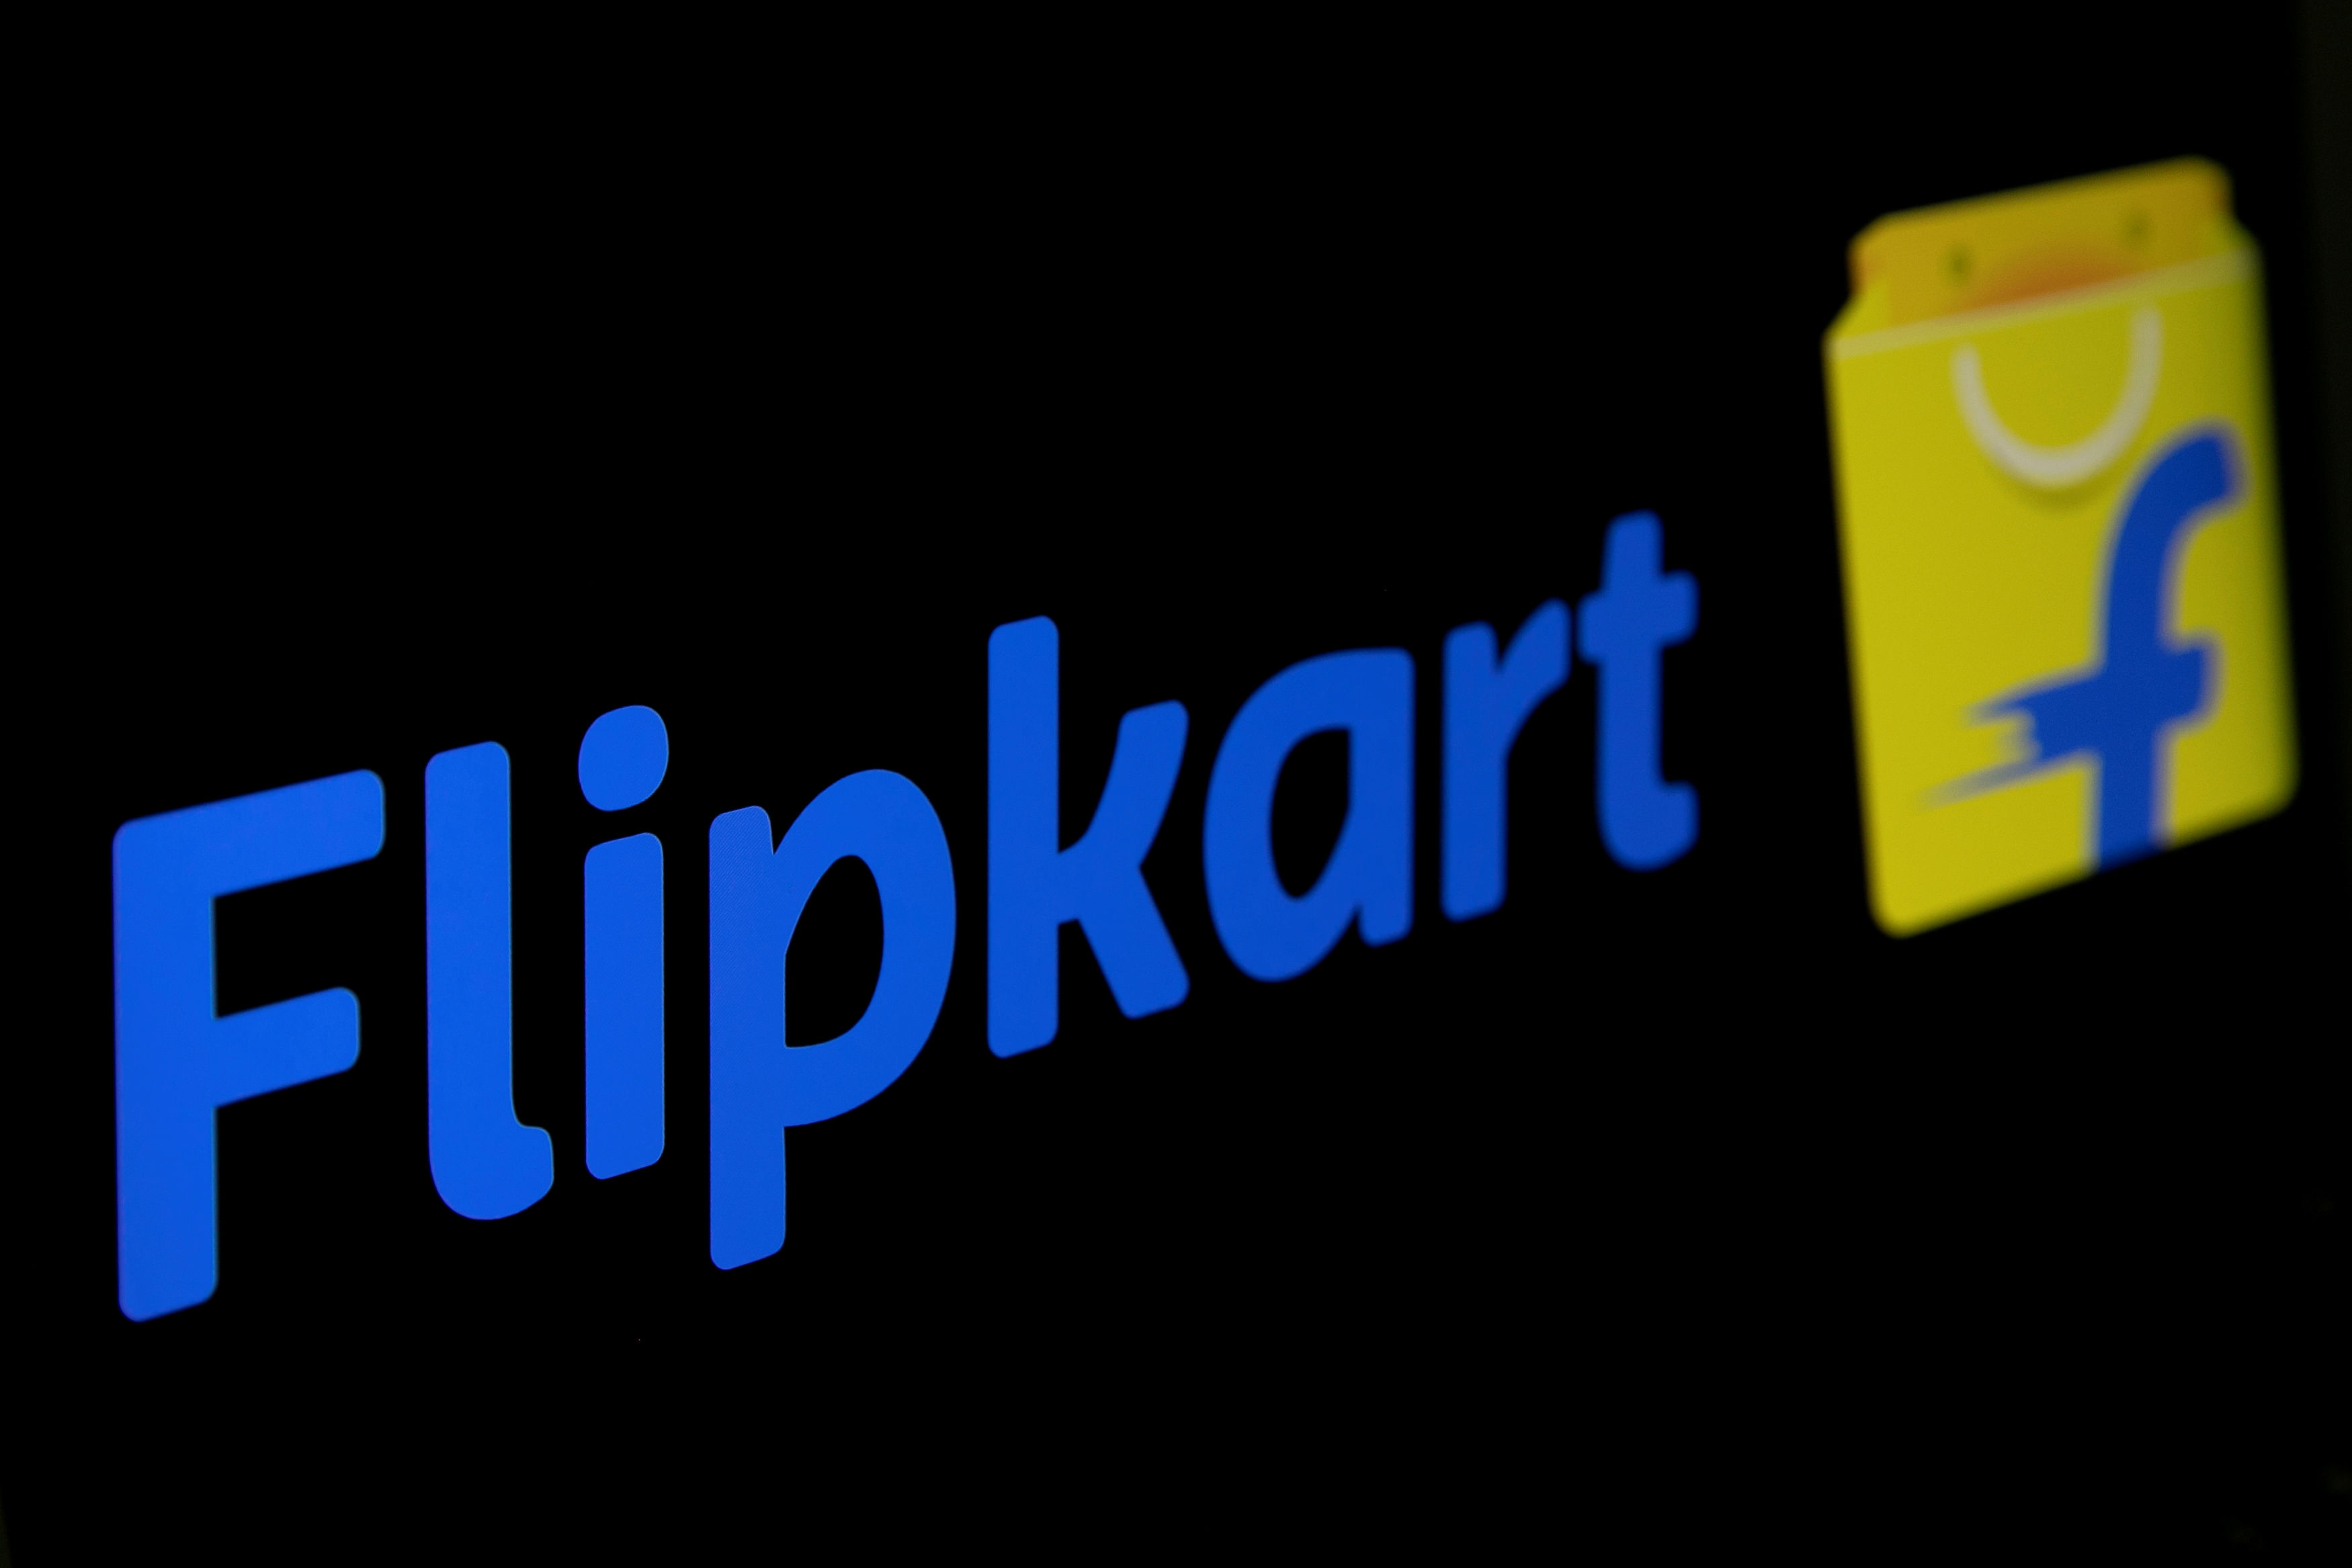 During the last festive season, Flipkart's FCs in Haryana served up to 40 per cent of the total number of orders from across India, the statement noted. (Reuters Photo)